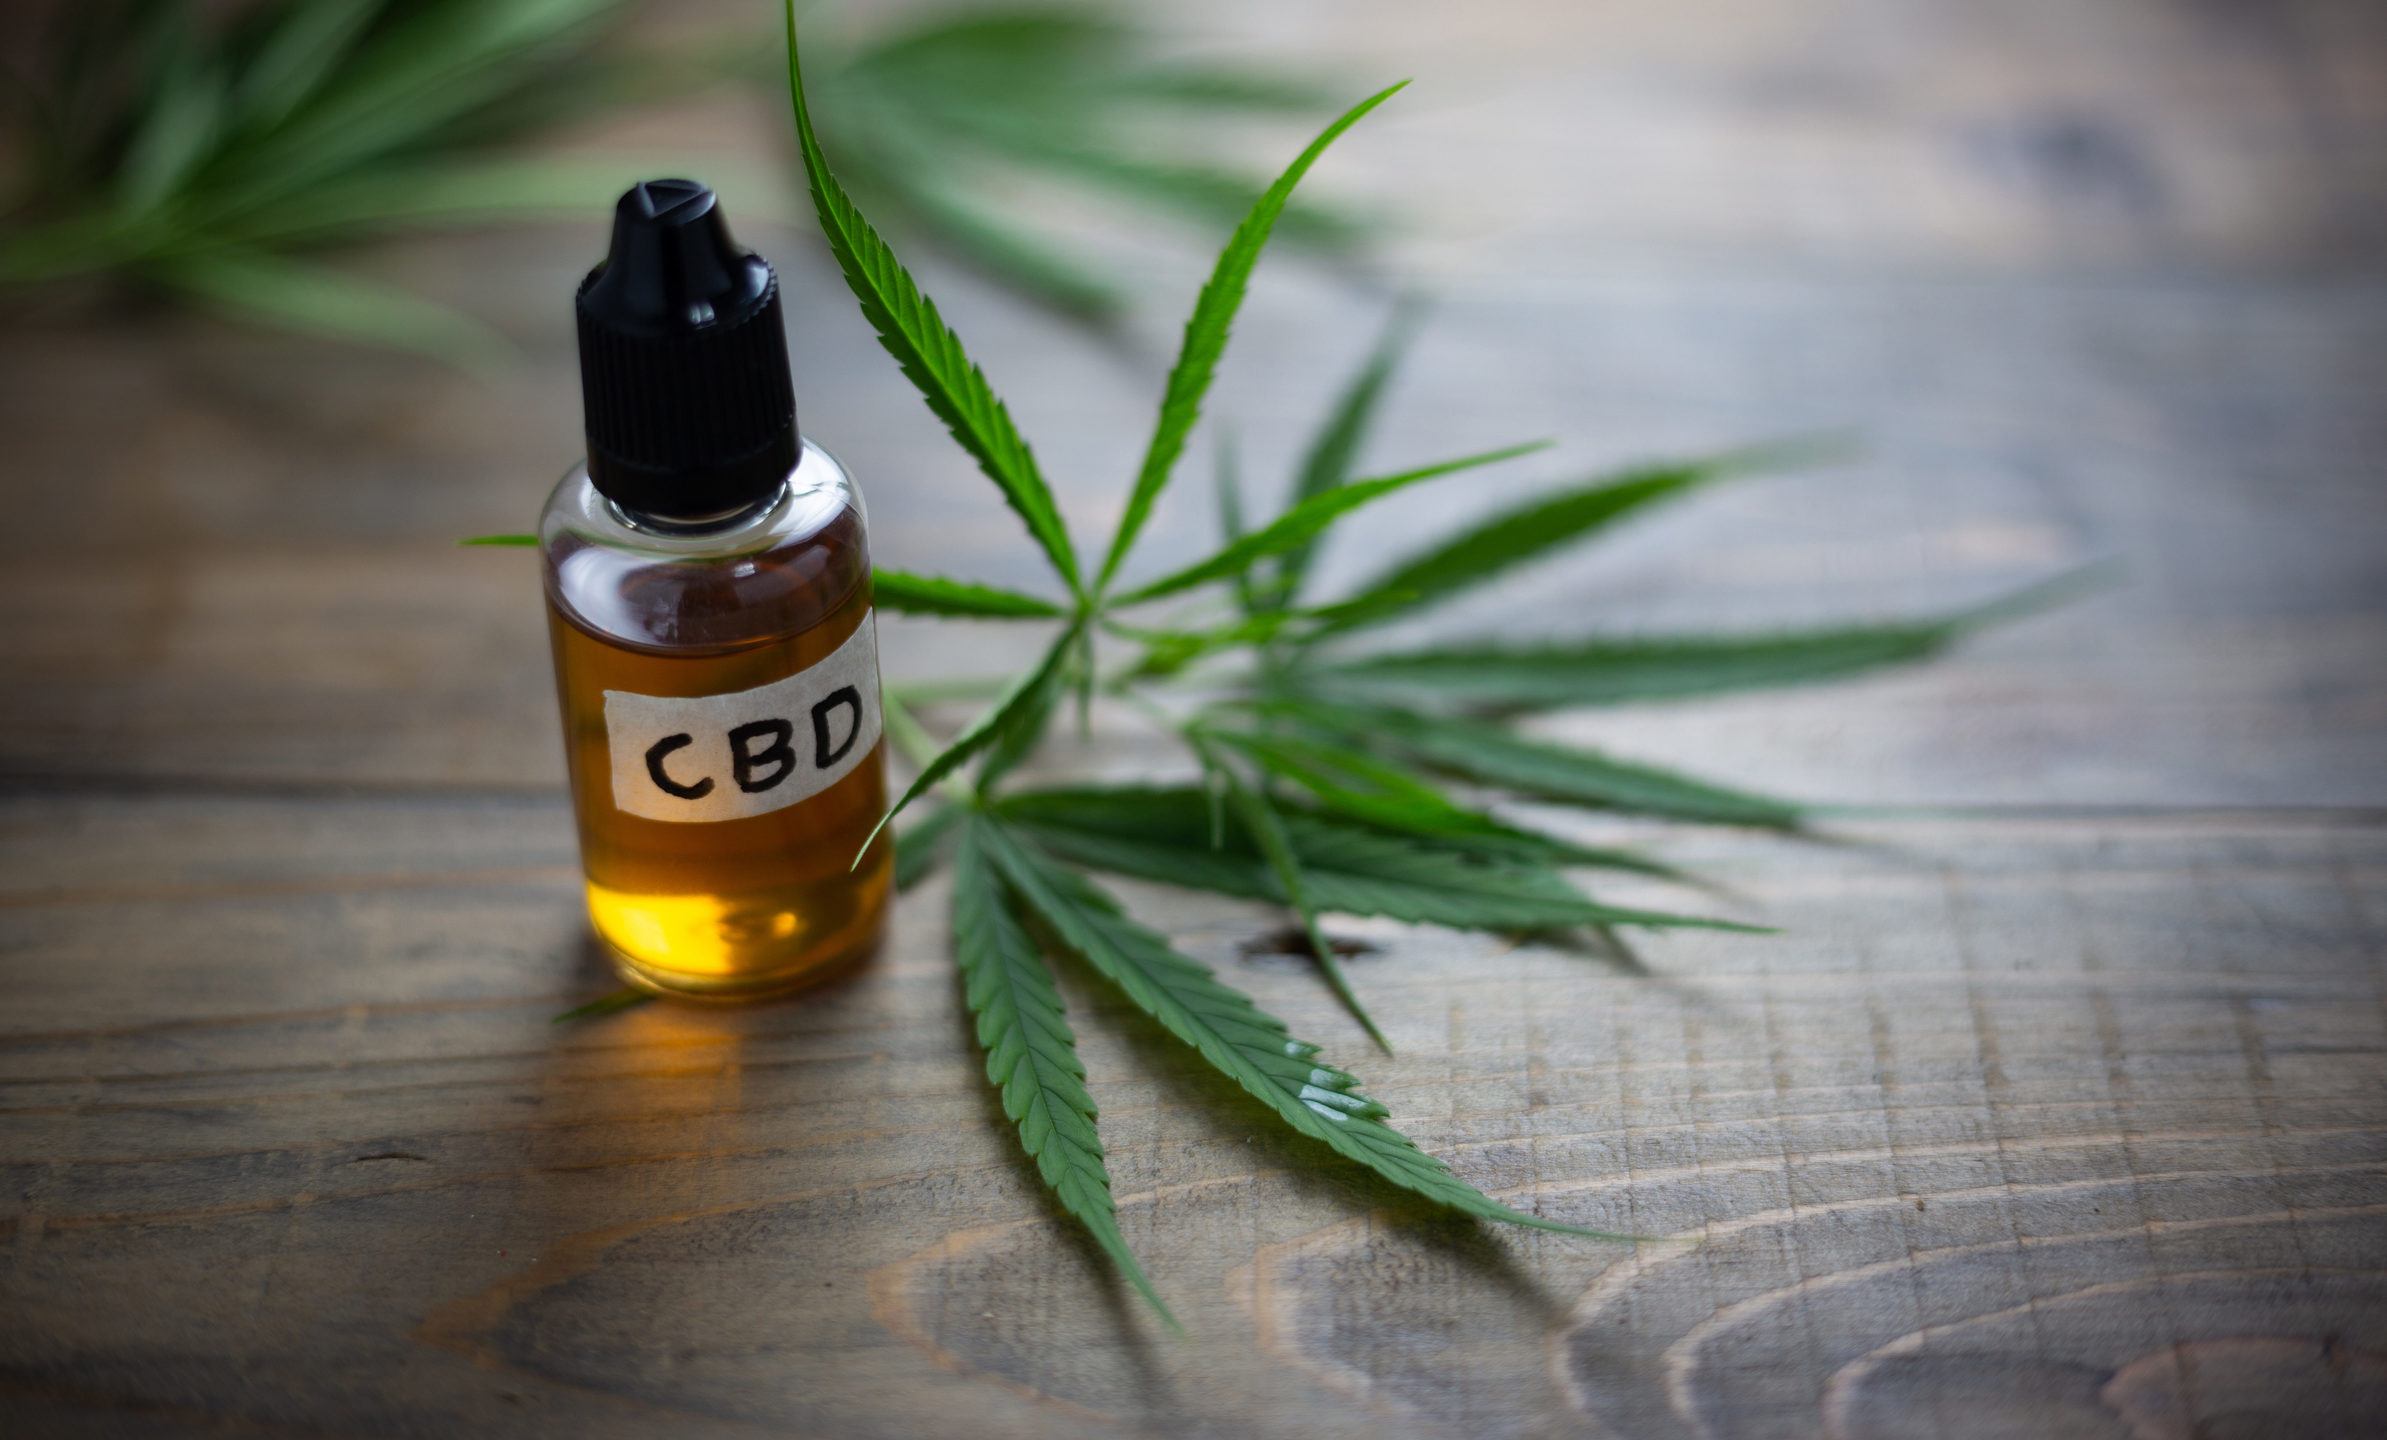 Our CBD buying guide will help you buy the right CBD oil for your needs. Photo: A dropper bottle of amber liquid, labeled "CBD," rests on a wooden table near some hemp leaves.